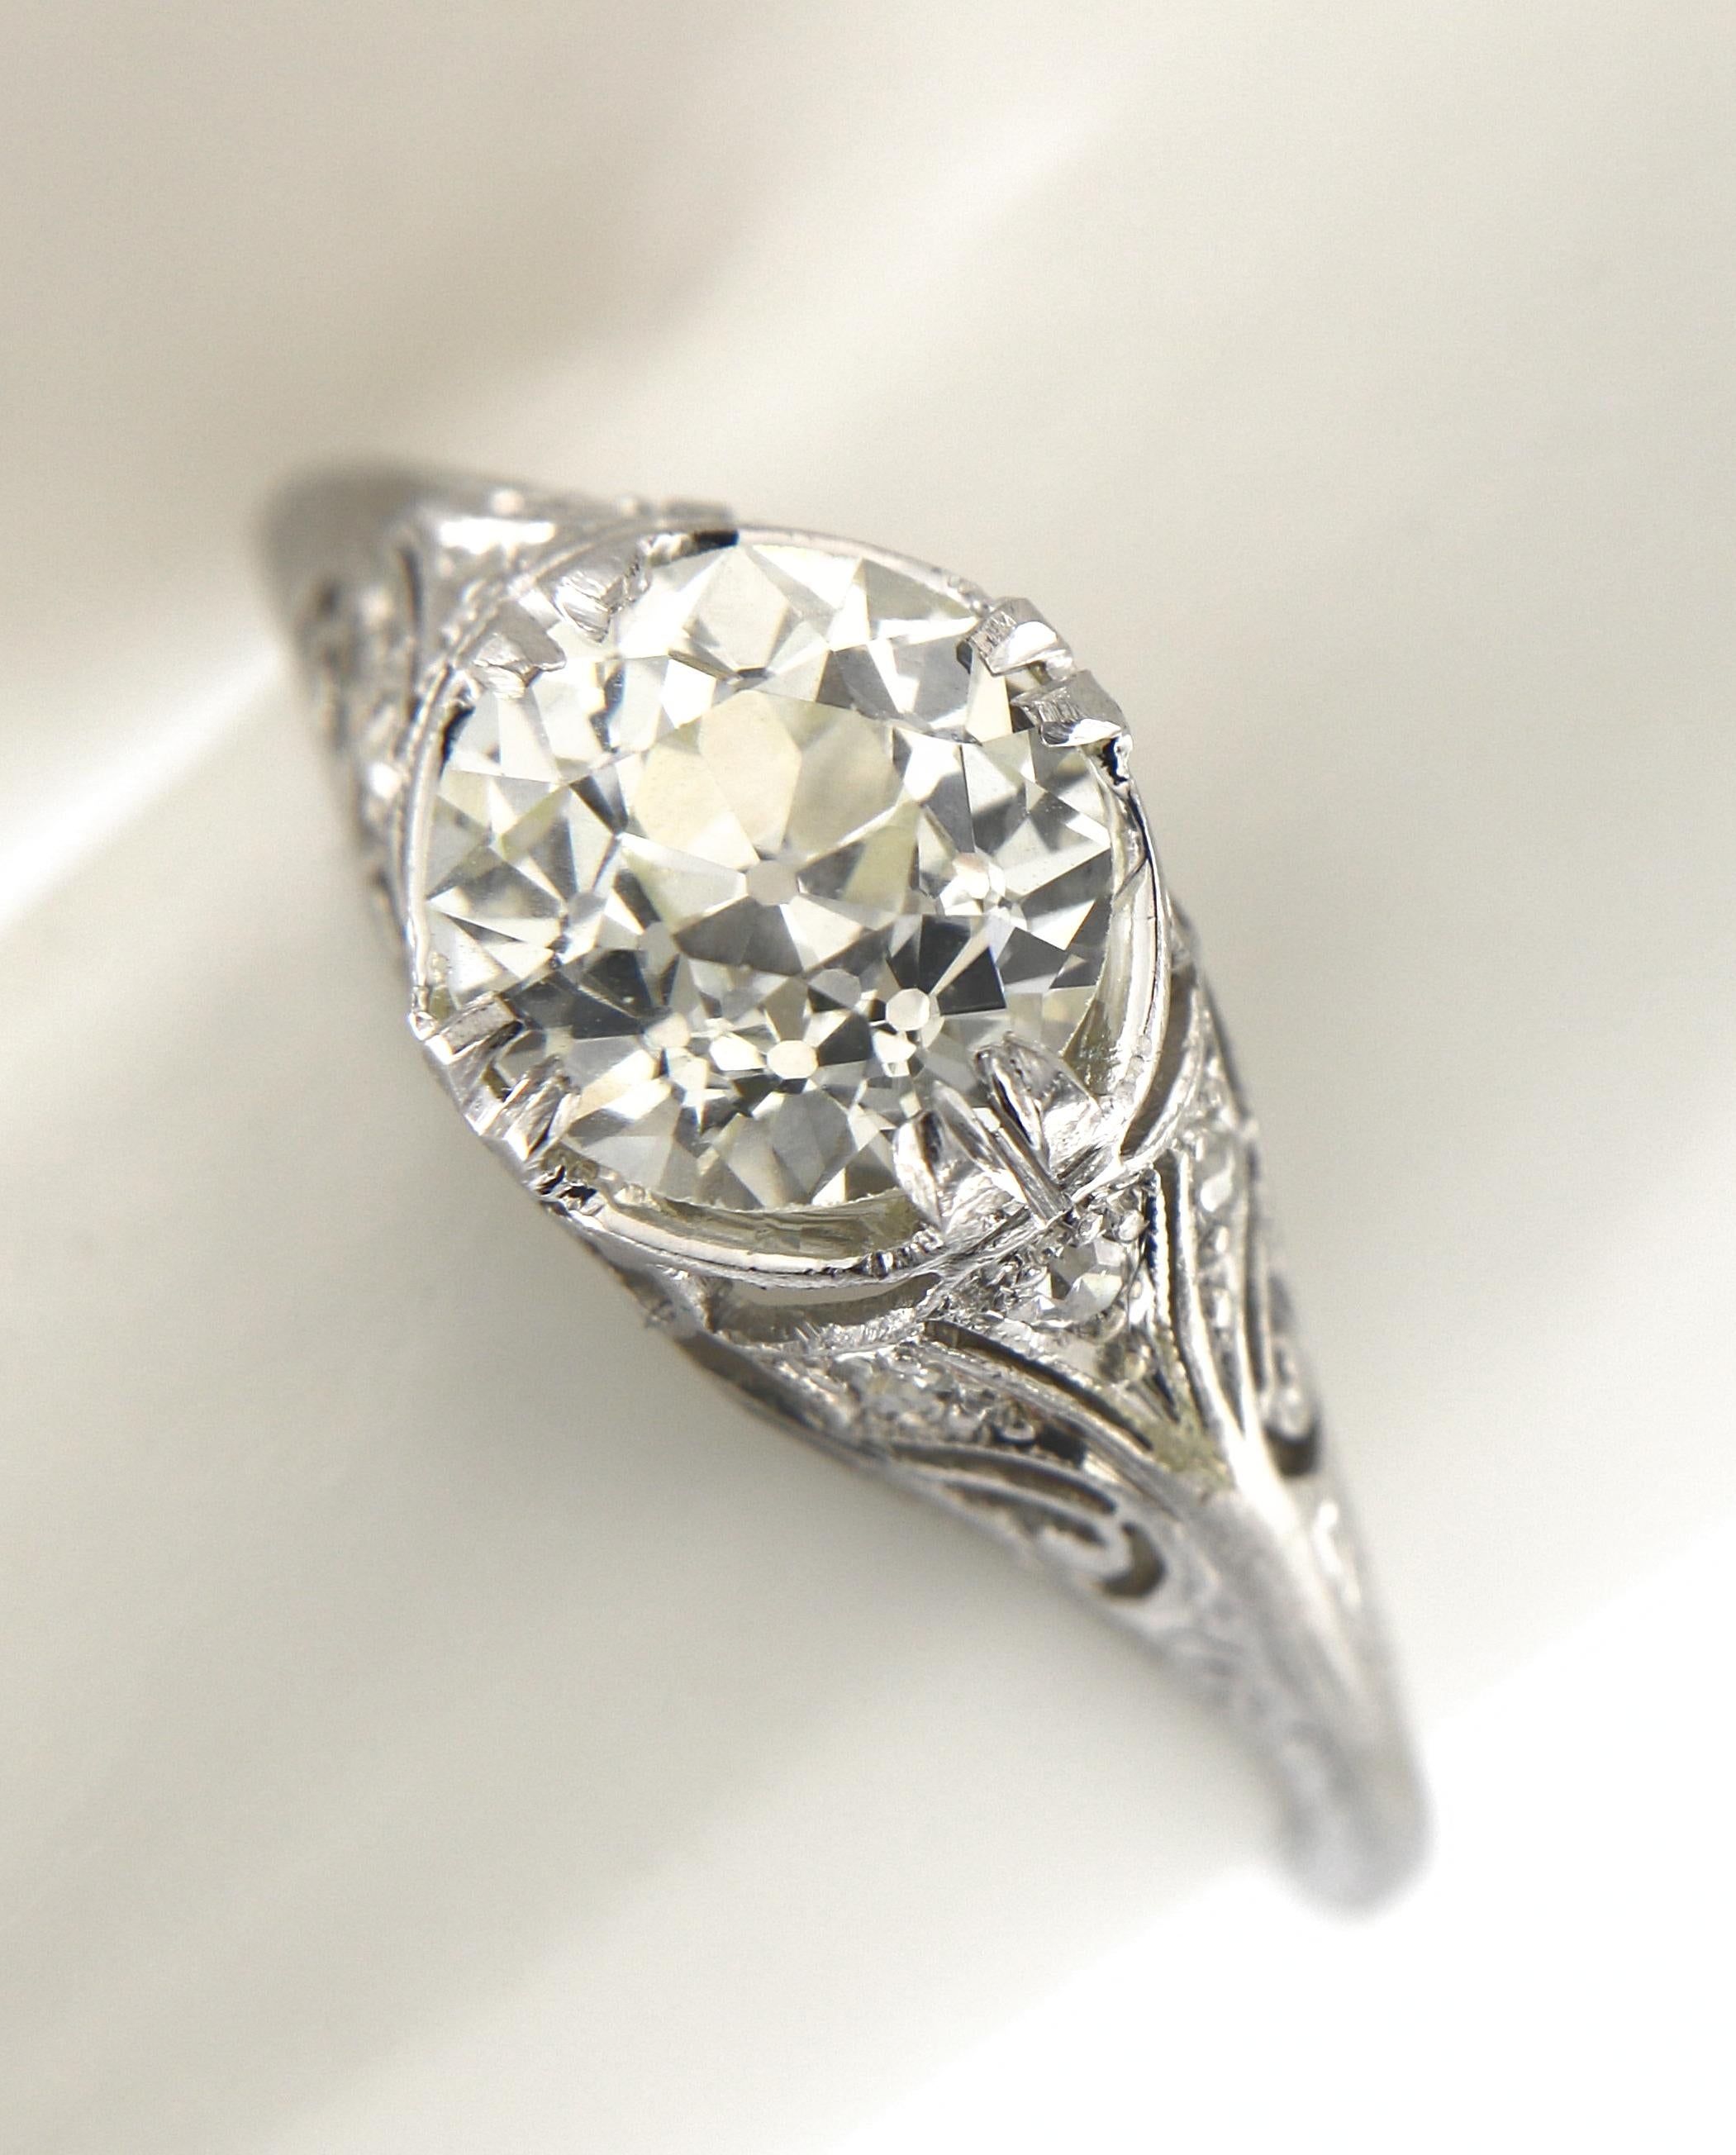 Offered here is an authentic Art Deco diamond engagement ring,
This delicate ring was handmade in platinum, the intriguing filigree design showcases one natural earth mined old European brilliant, G.I.A certified that it is a natural old European